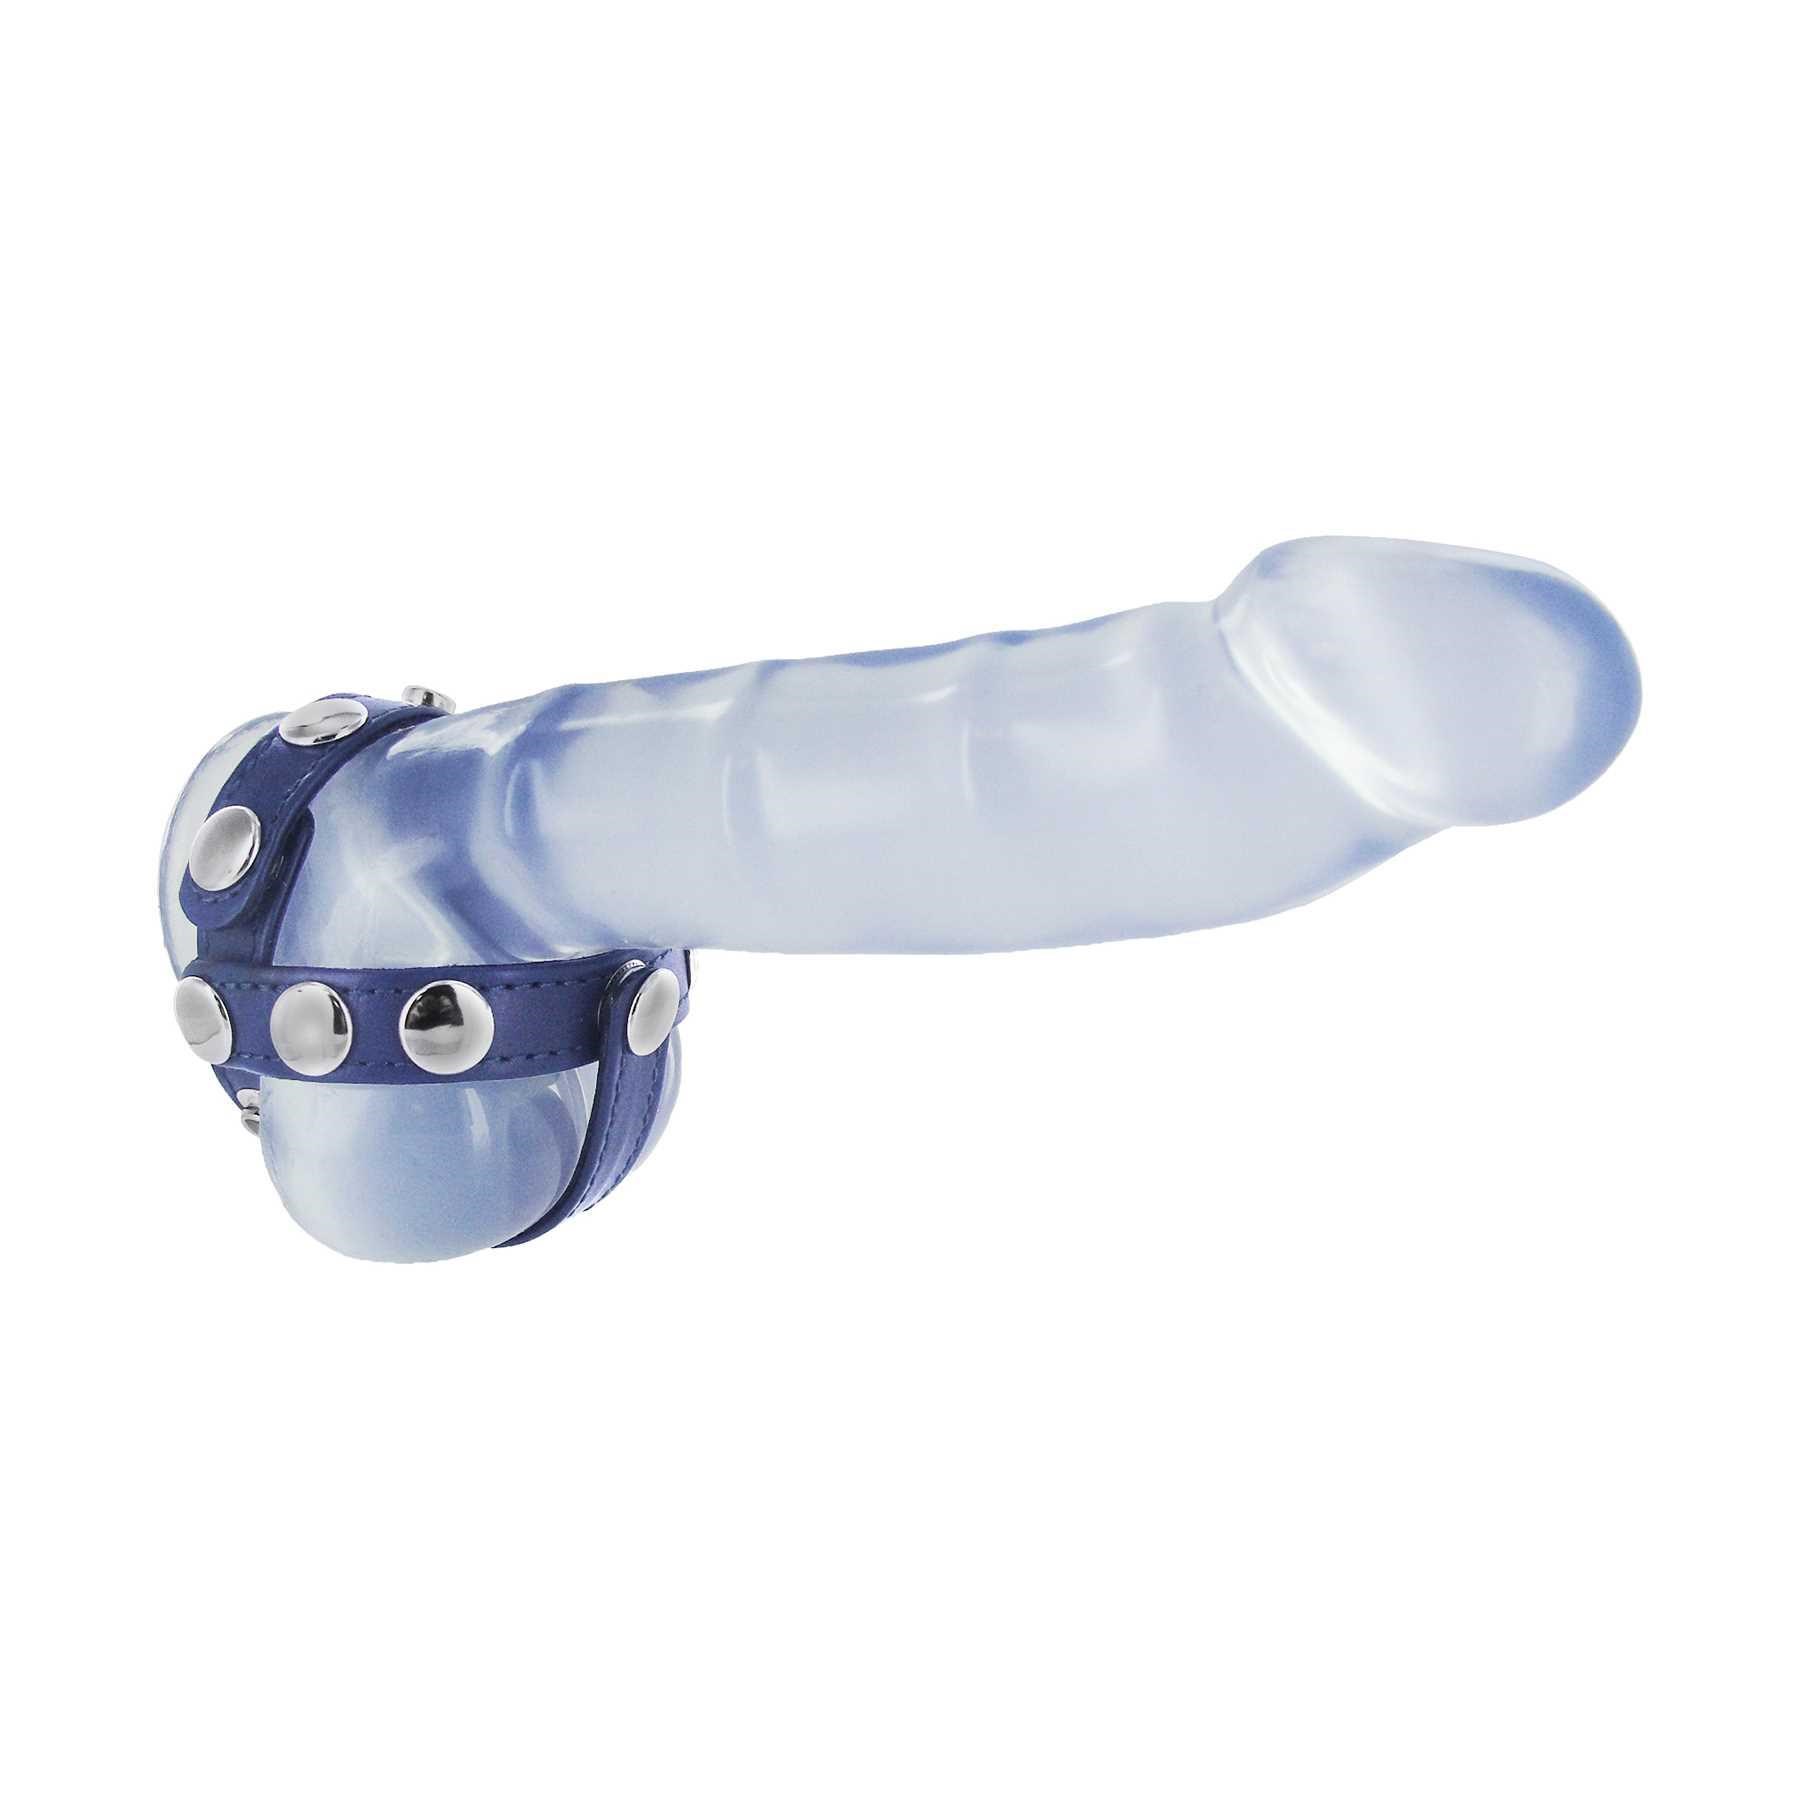 Cock and Ball Harness shown on dildo side view